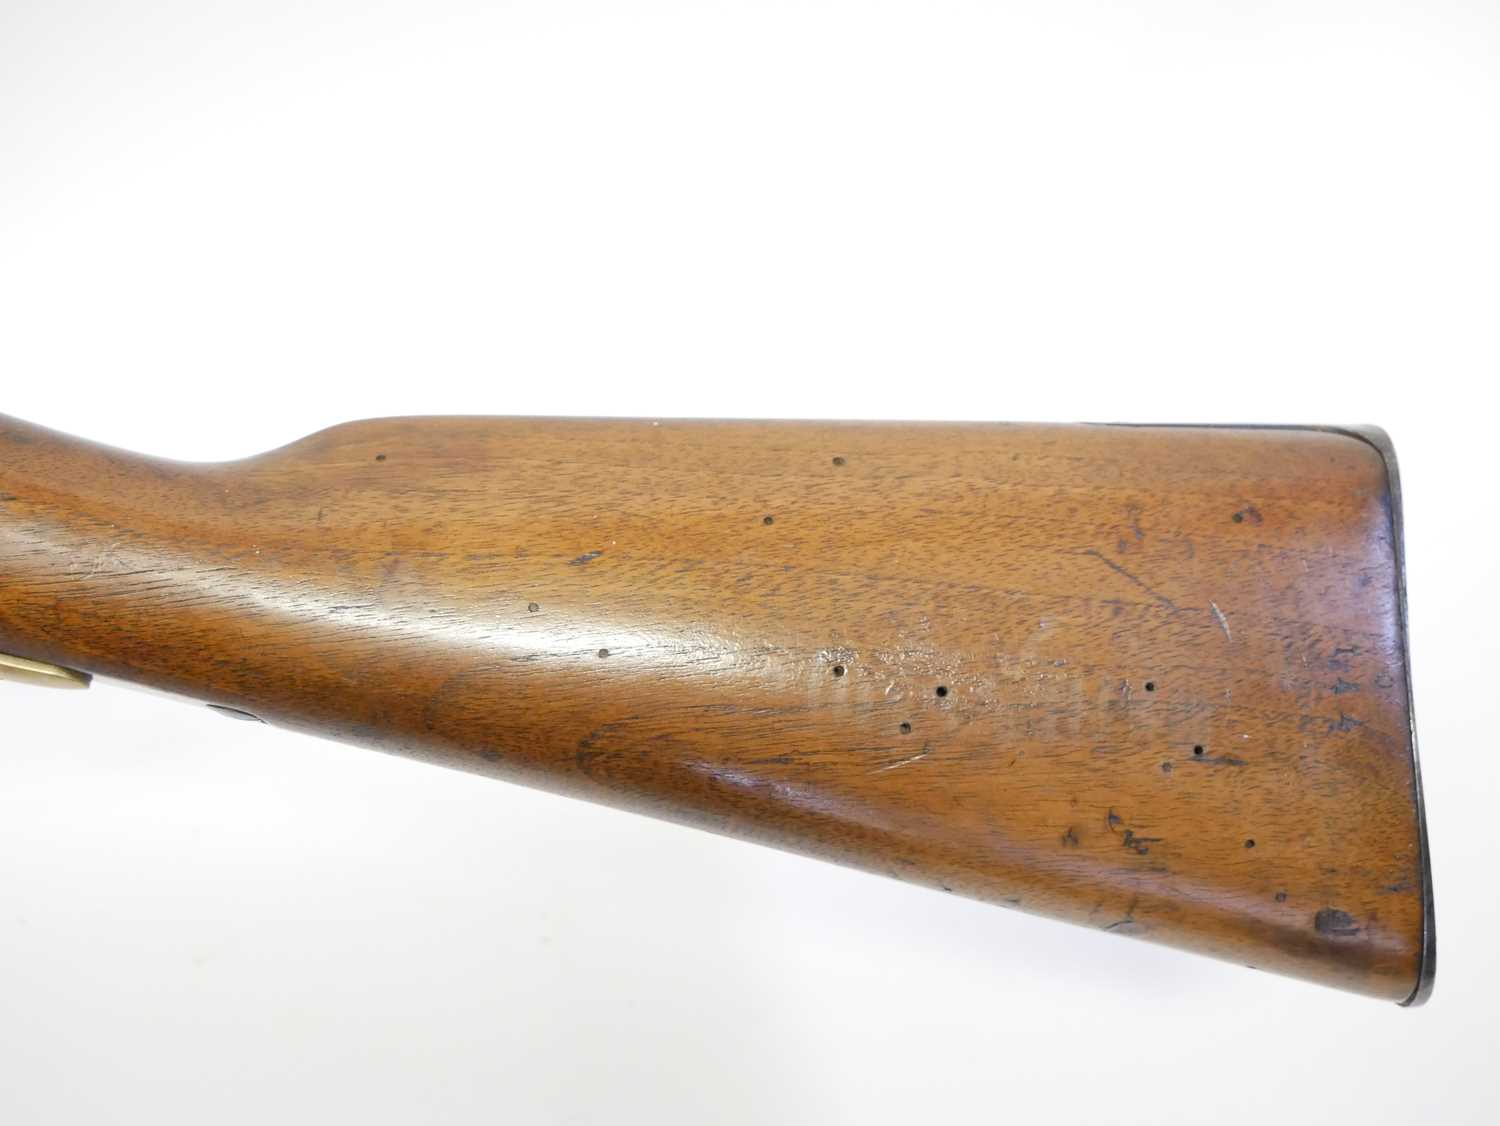 Rare British manufactured Mauser 1871 pattern 11x60R bolt action rifle, serial number 8177D, - Image 16 of 21